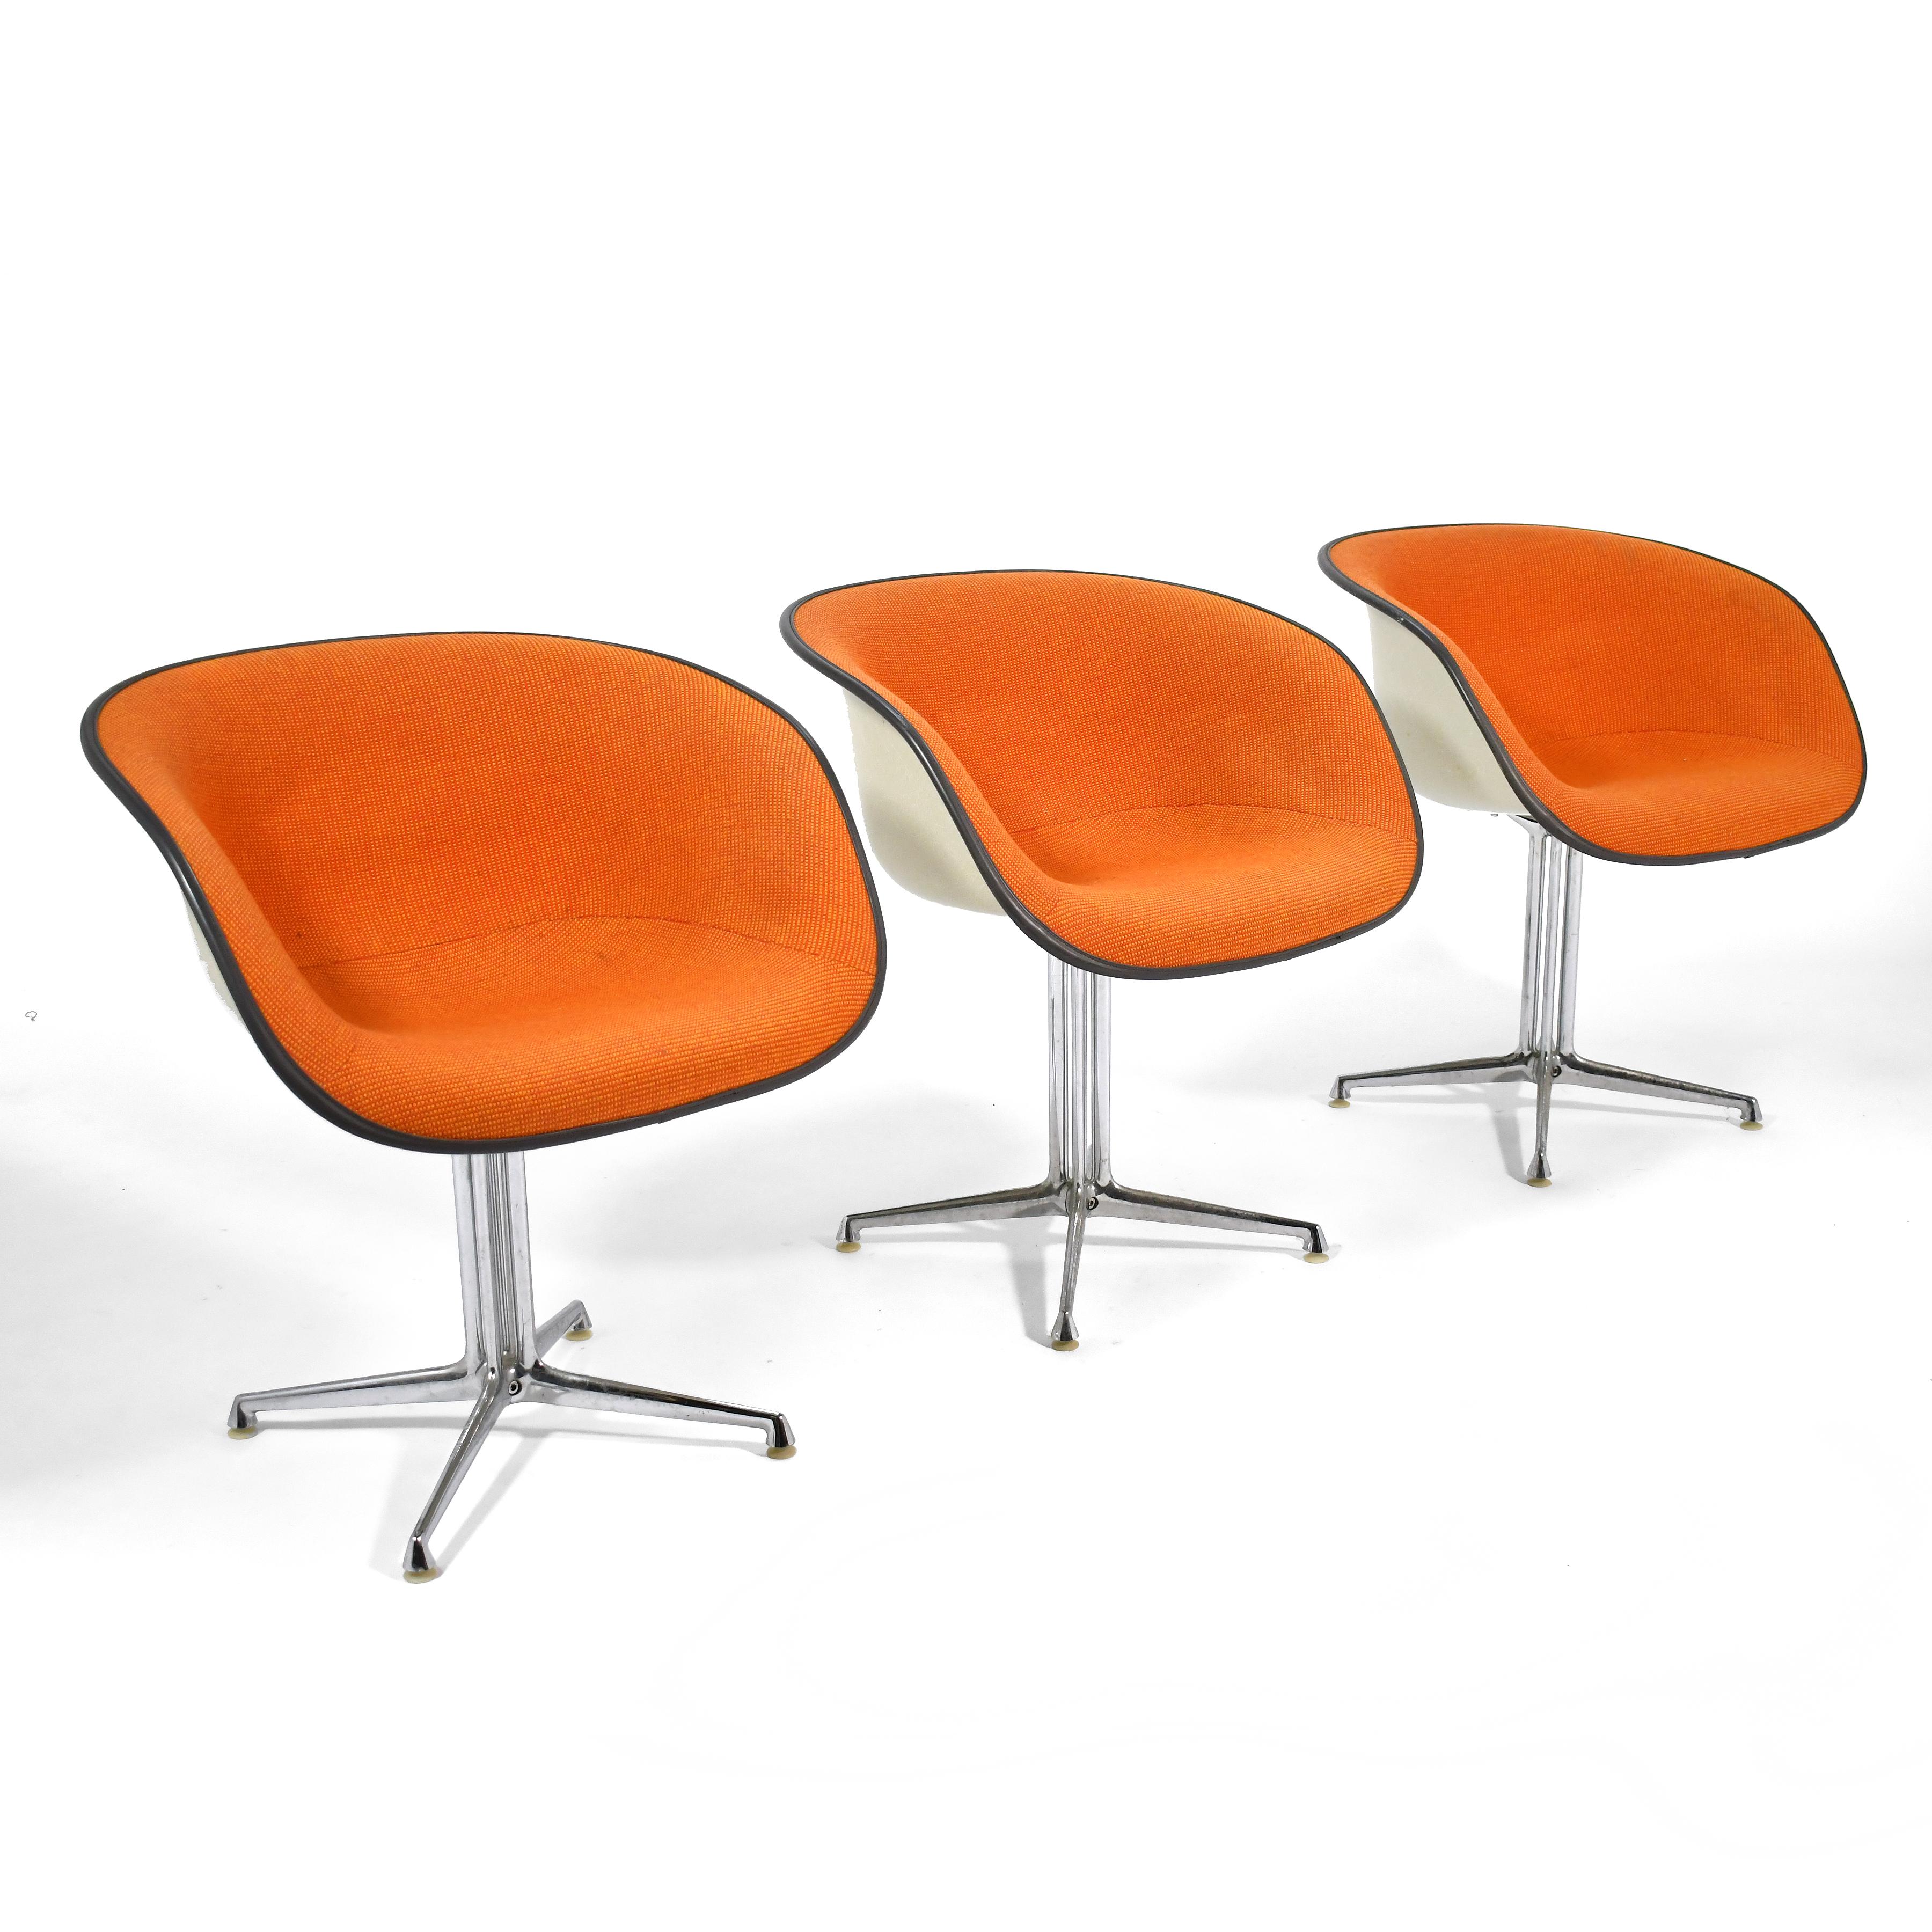 Late 20th Century Eames La Fonda Chairs by Herman Miller